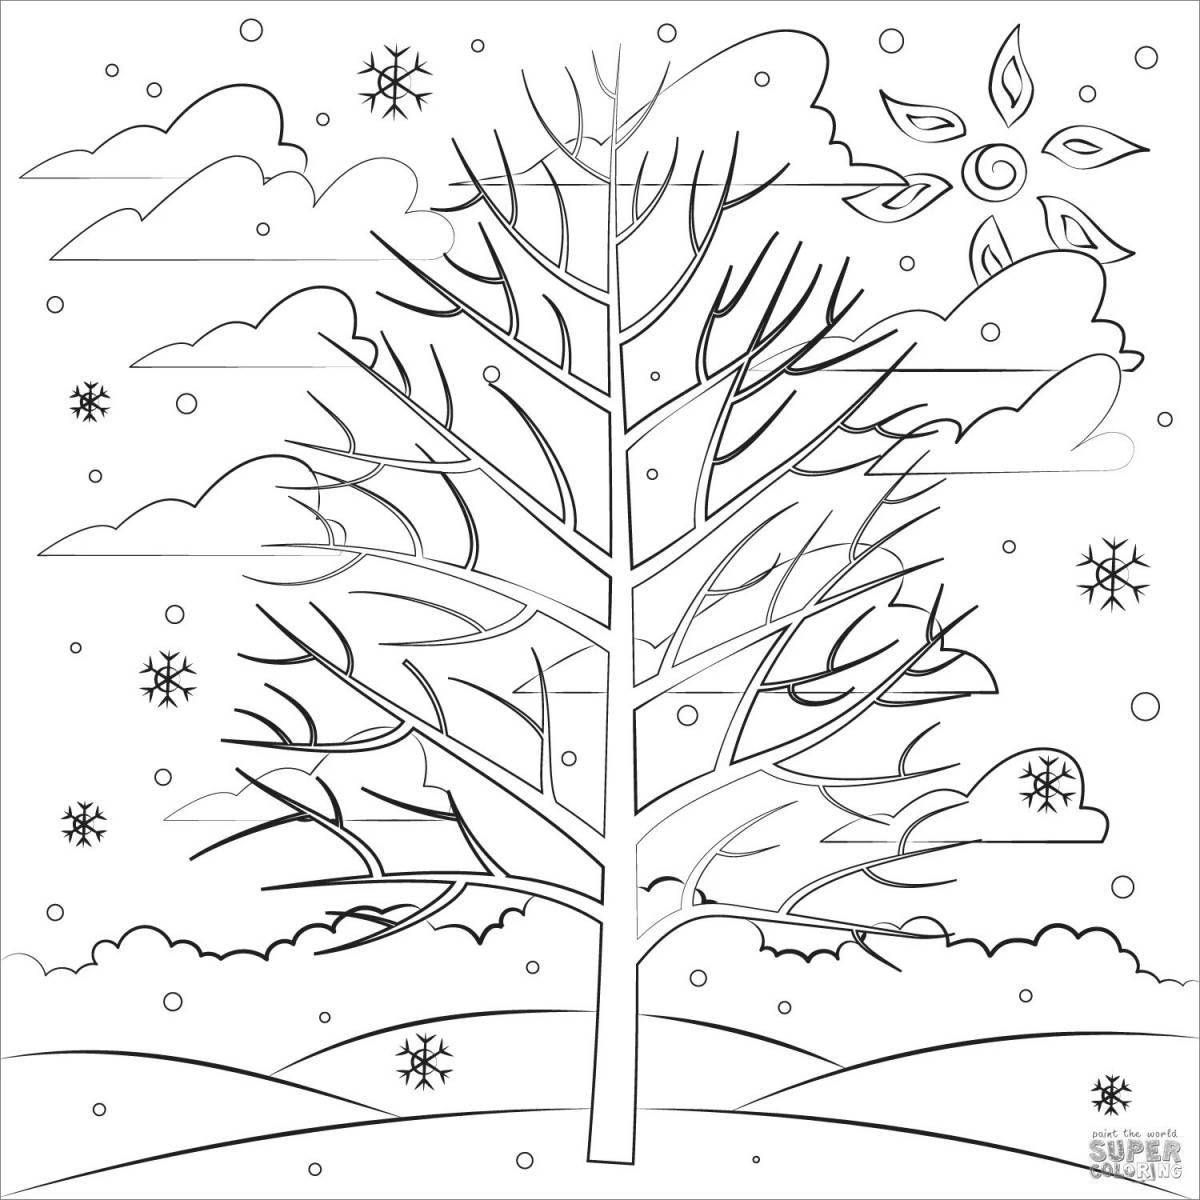 Whimsical winter in the forest coloring book